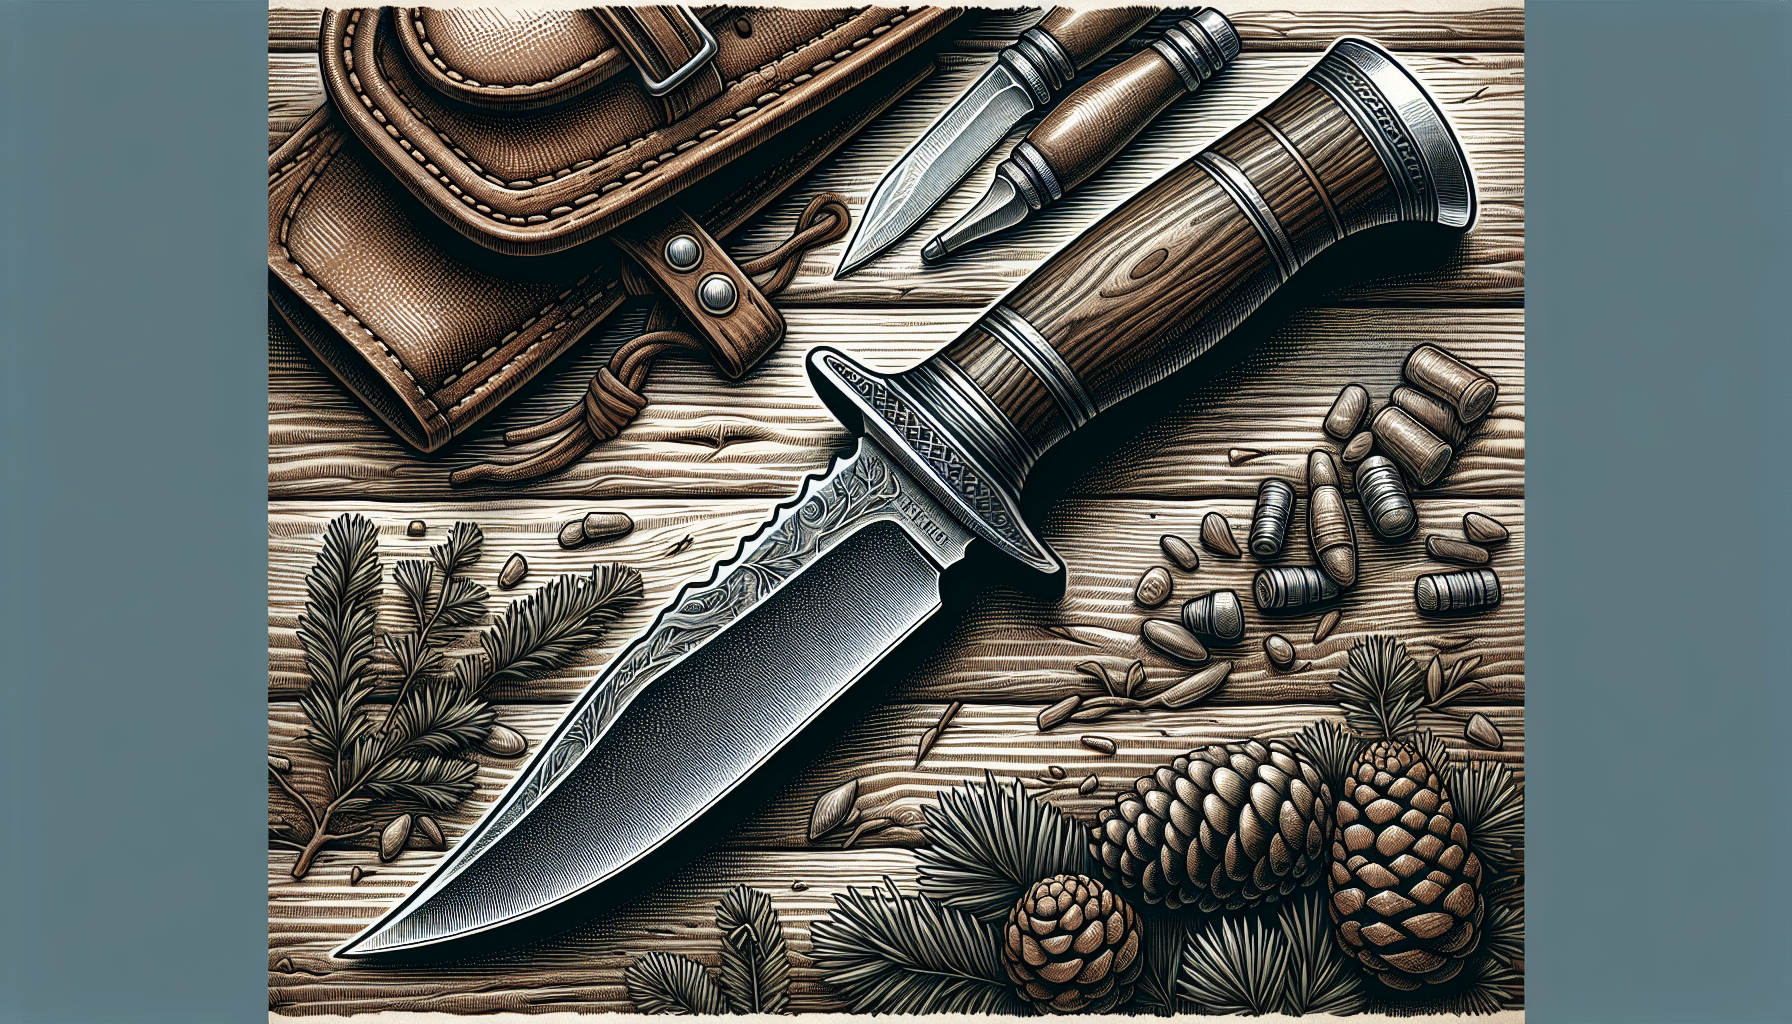 Detailed illustration of a high-quality deer hunting knife. The knife should have a sharp, curved blade suitable for dressing a deer. It should display characteristics typical of a hunting knife such as a sturdy handle made from hardwood or bone with a non-slip grip. At the base of the blade, there should be a finger guard for safety. The knife rests on a rough wooden surface, surrounded by elements of a typical hunting environment, such as pine cones, foliage, and a worn leather sheath for the knife. No text, brand names, logos, or people should appear in the image.